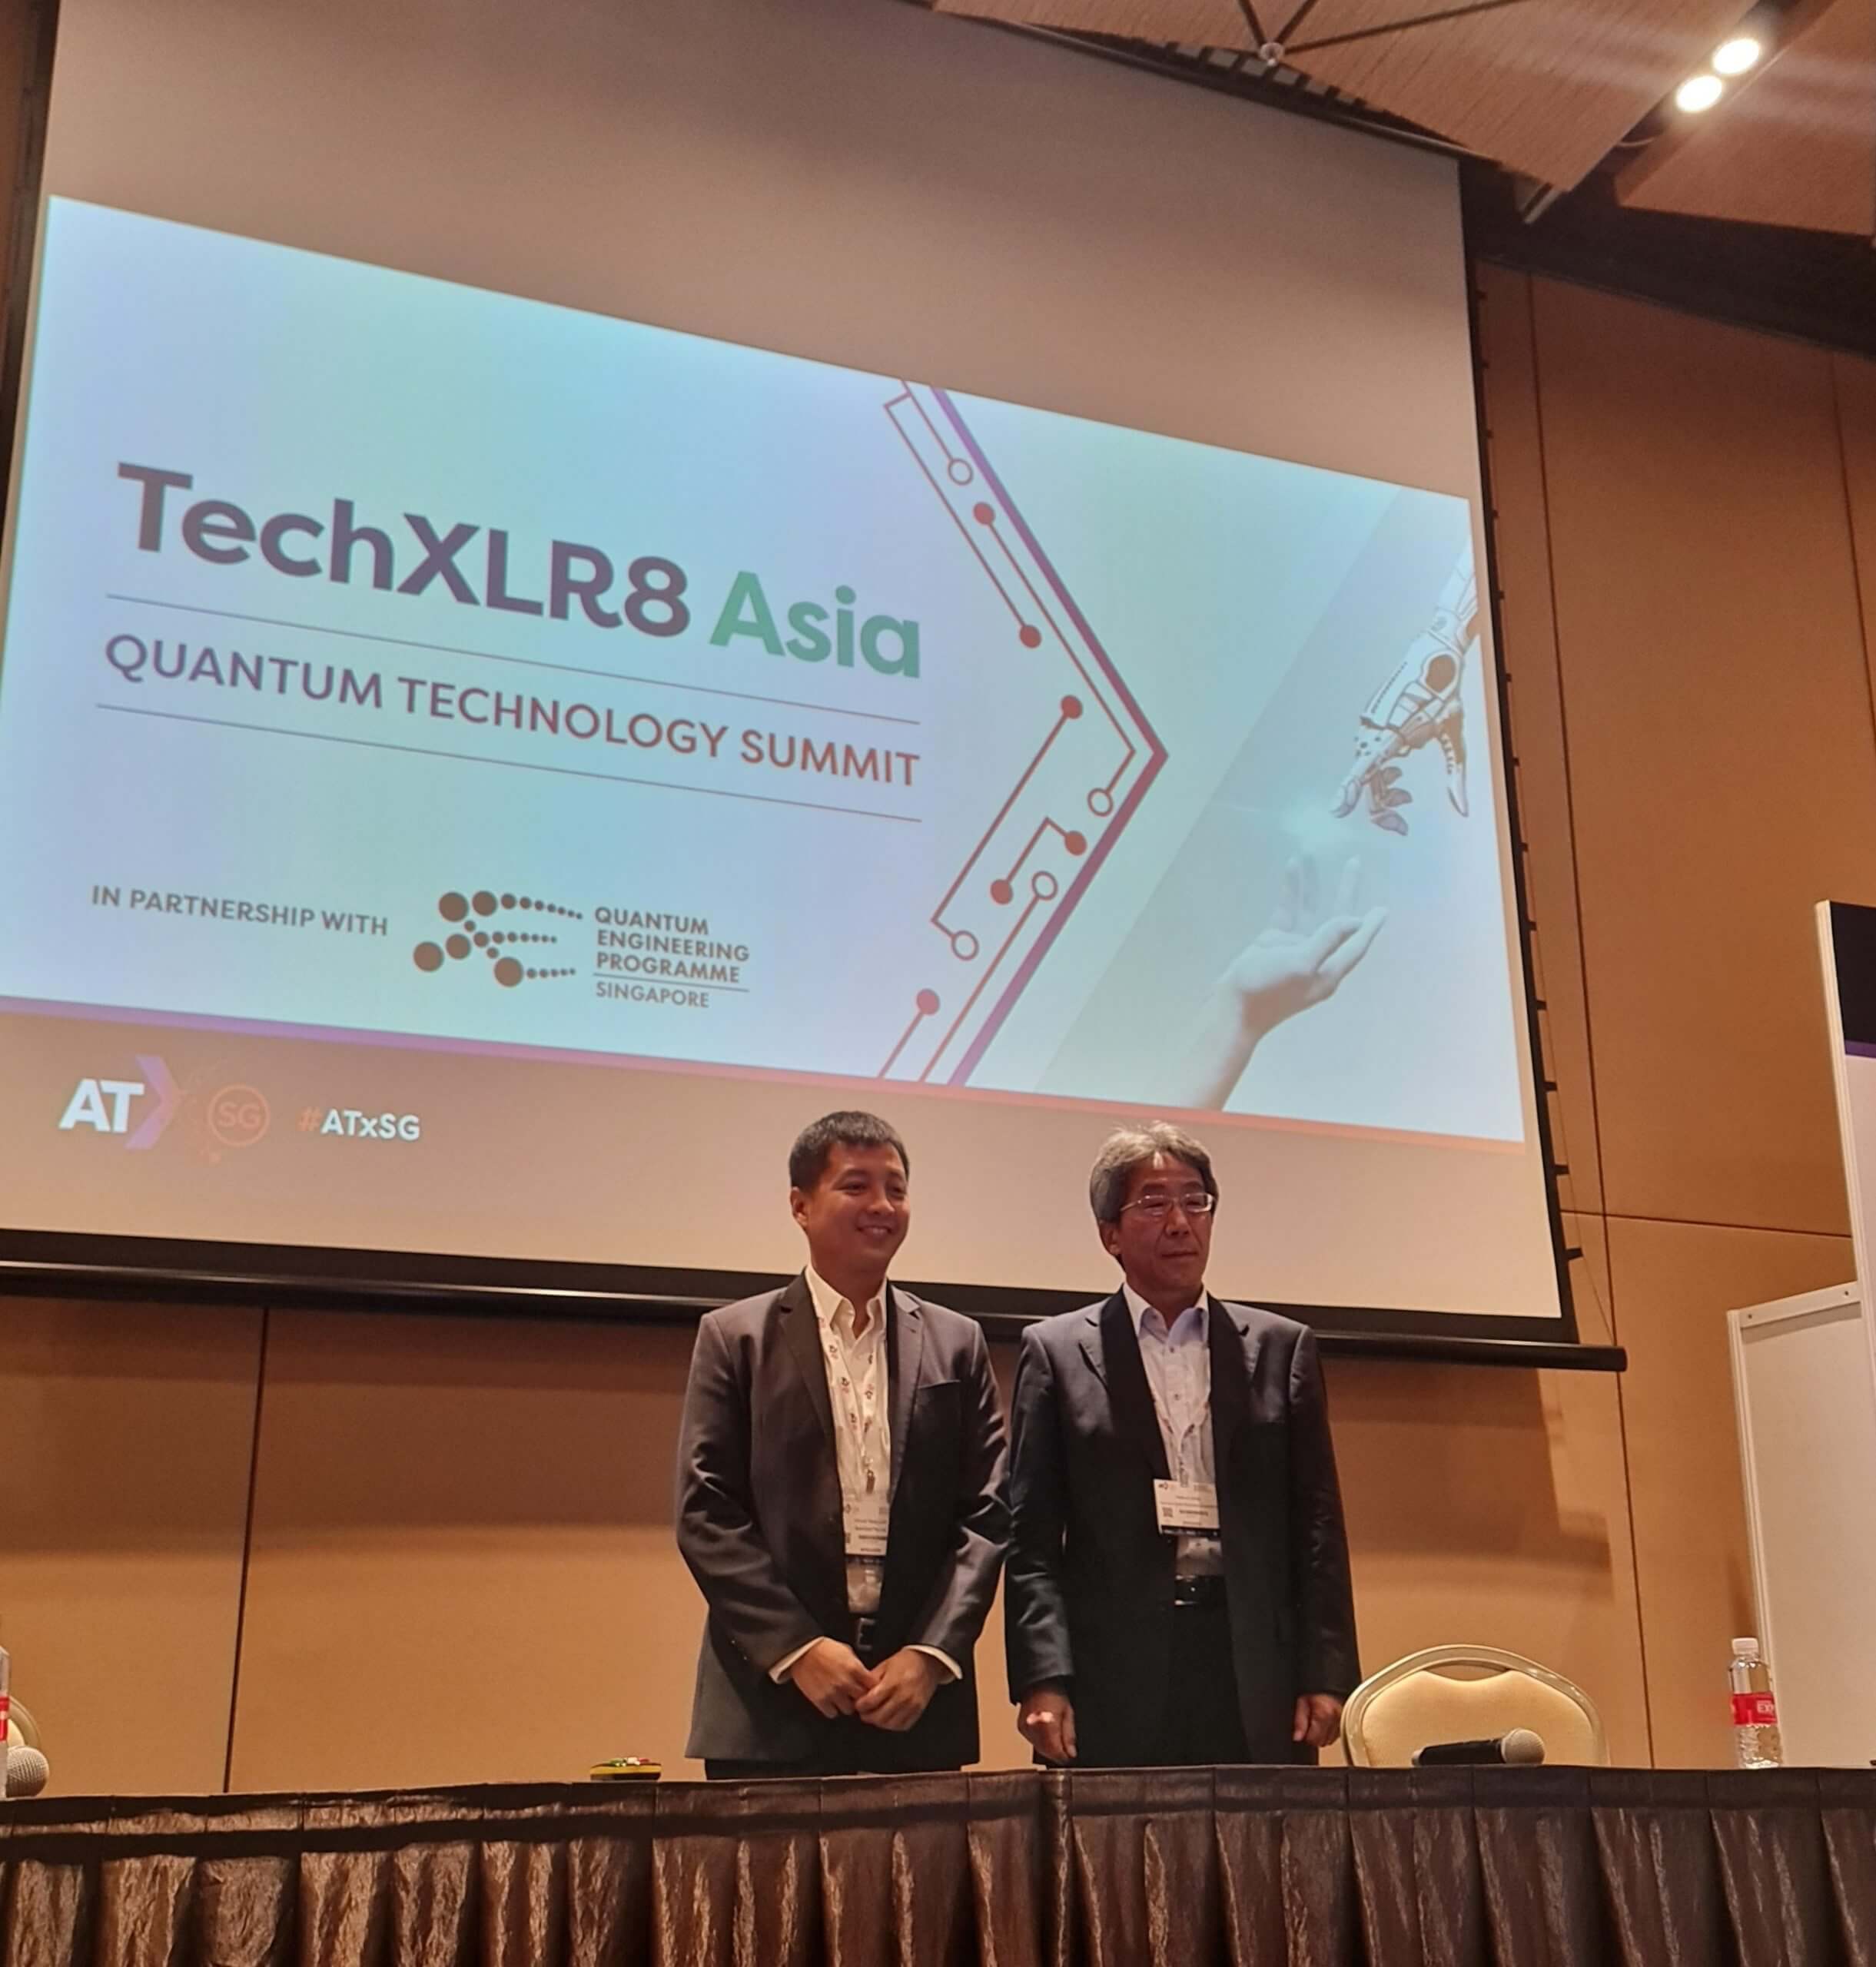 Toshiba presents “Achieving the secure Quantum keys of tomorrow, today” at Asia TechXSingapore 2022